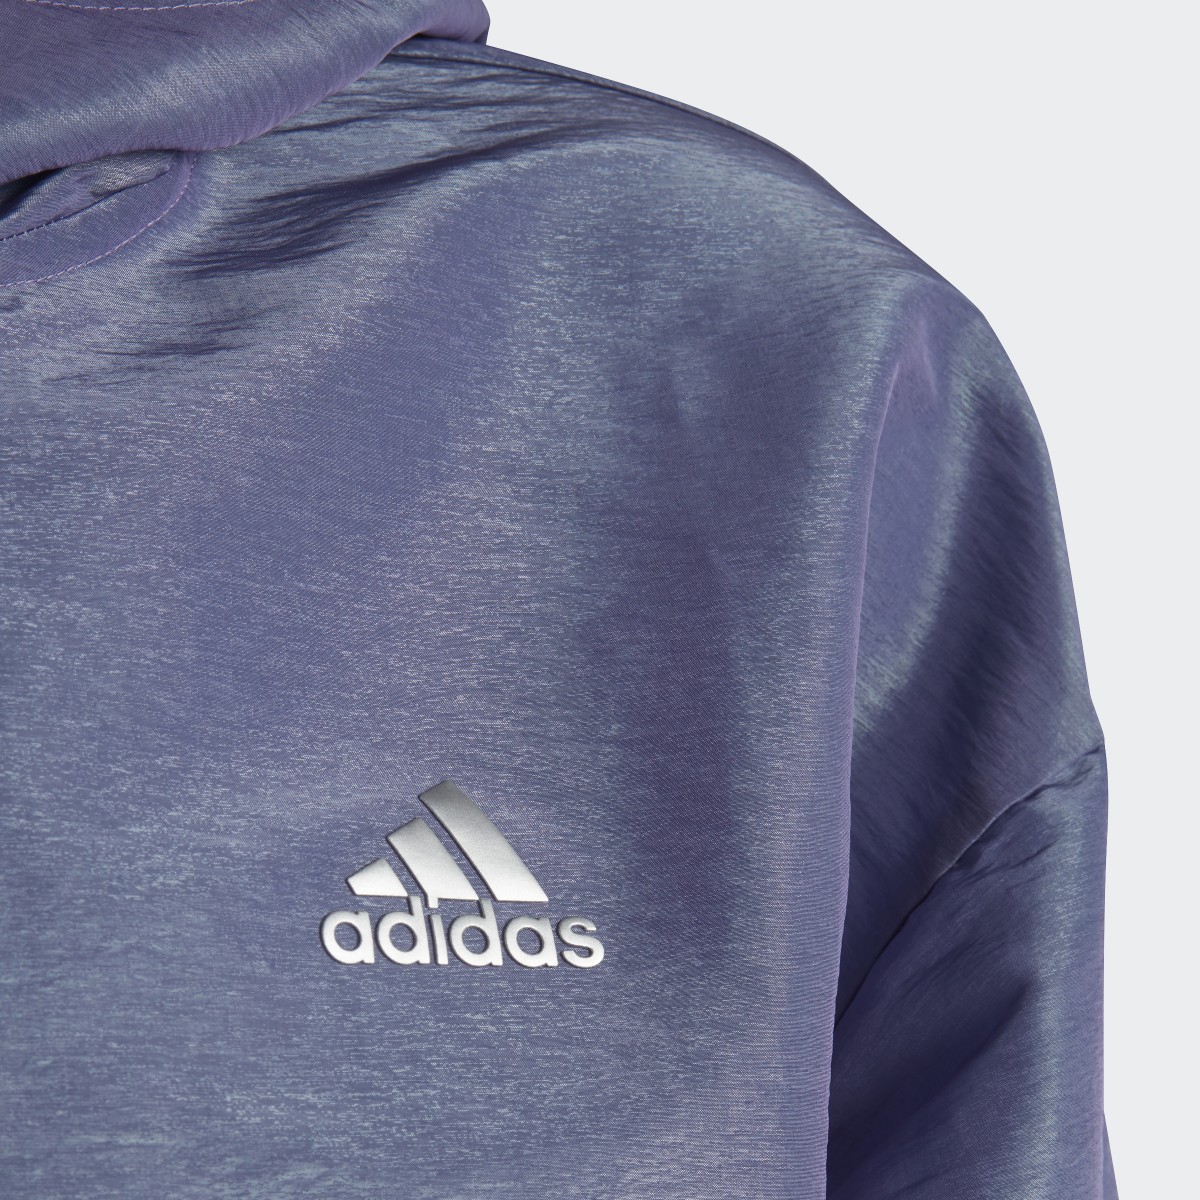 Adidas Dance Loose Fit Woven Half-Zip Hooded Track Top. 4